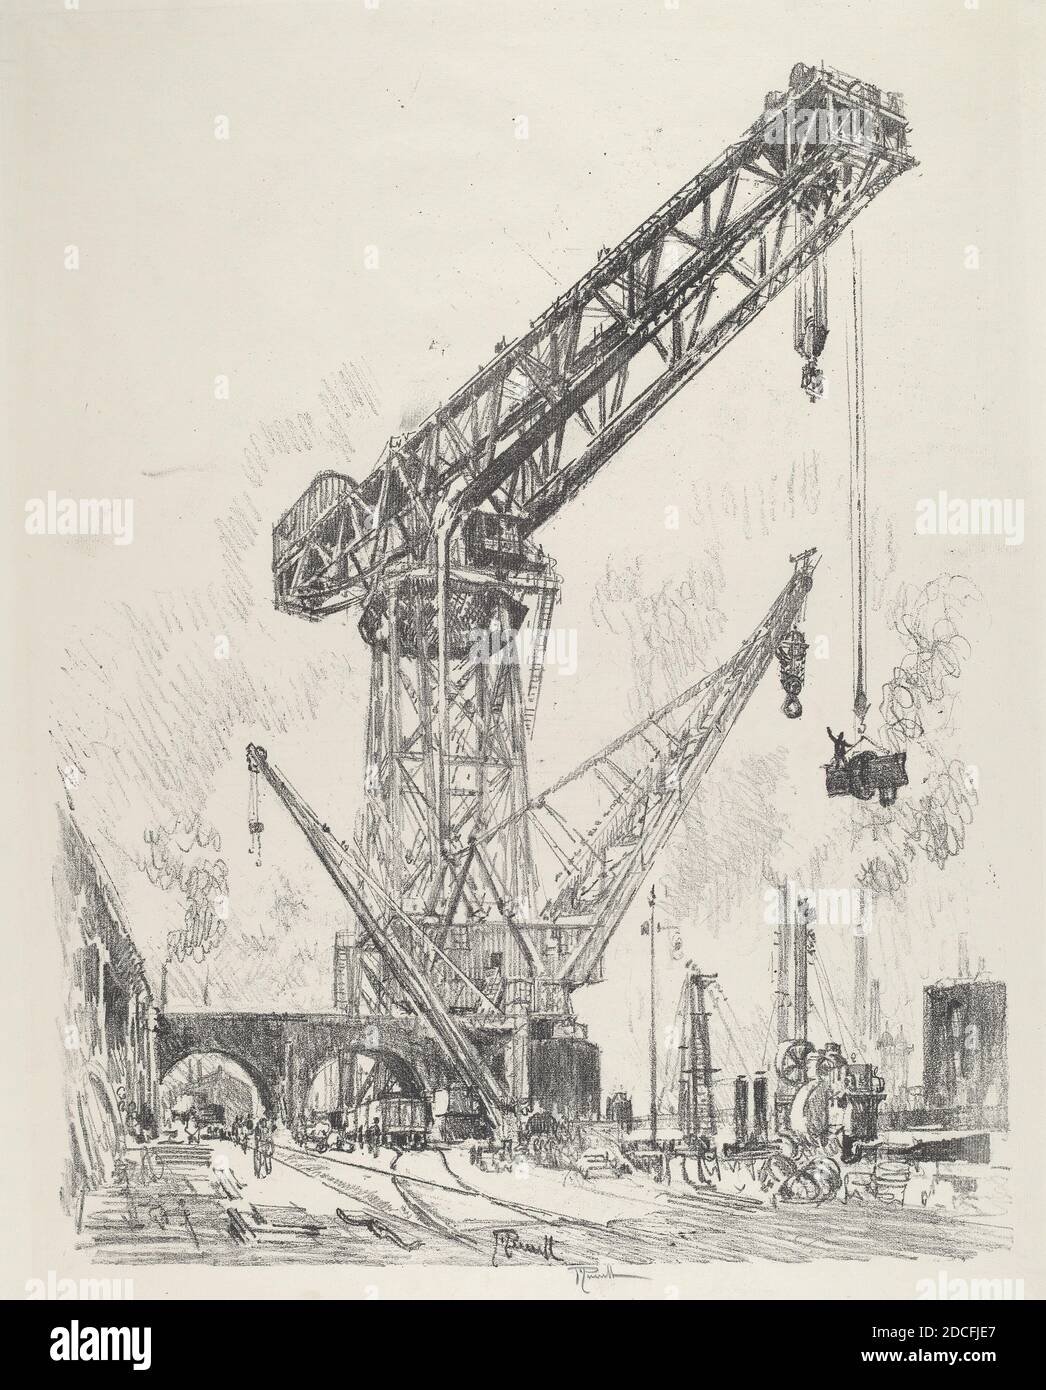 Joseph Pennell, (artist), American, 1857 - 1926, Made in Germany, the Great Crane, English War Work, (series), 1916, lithograph Stock Photo